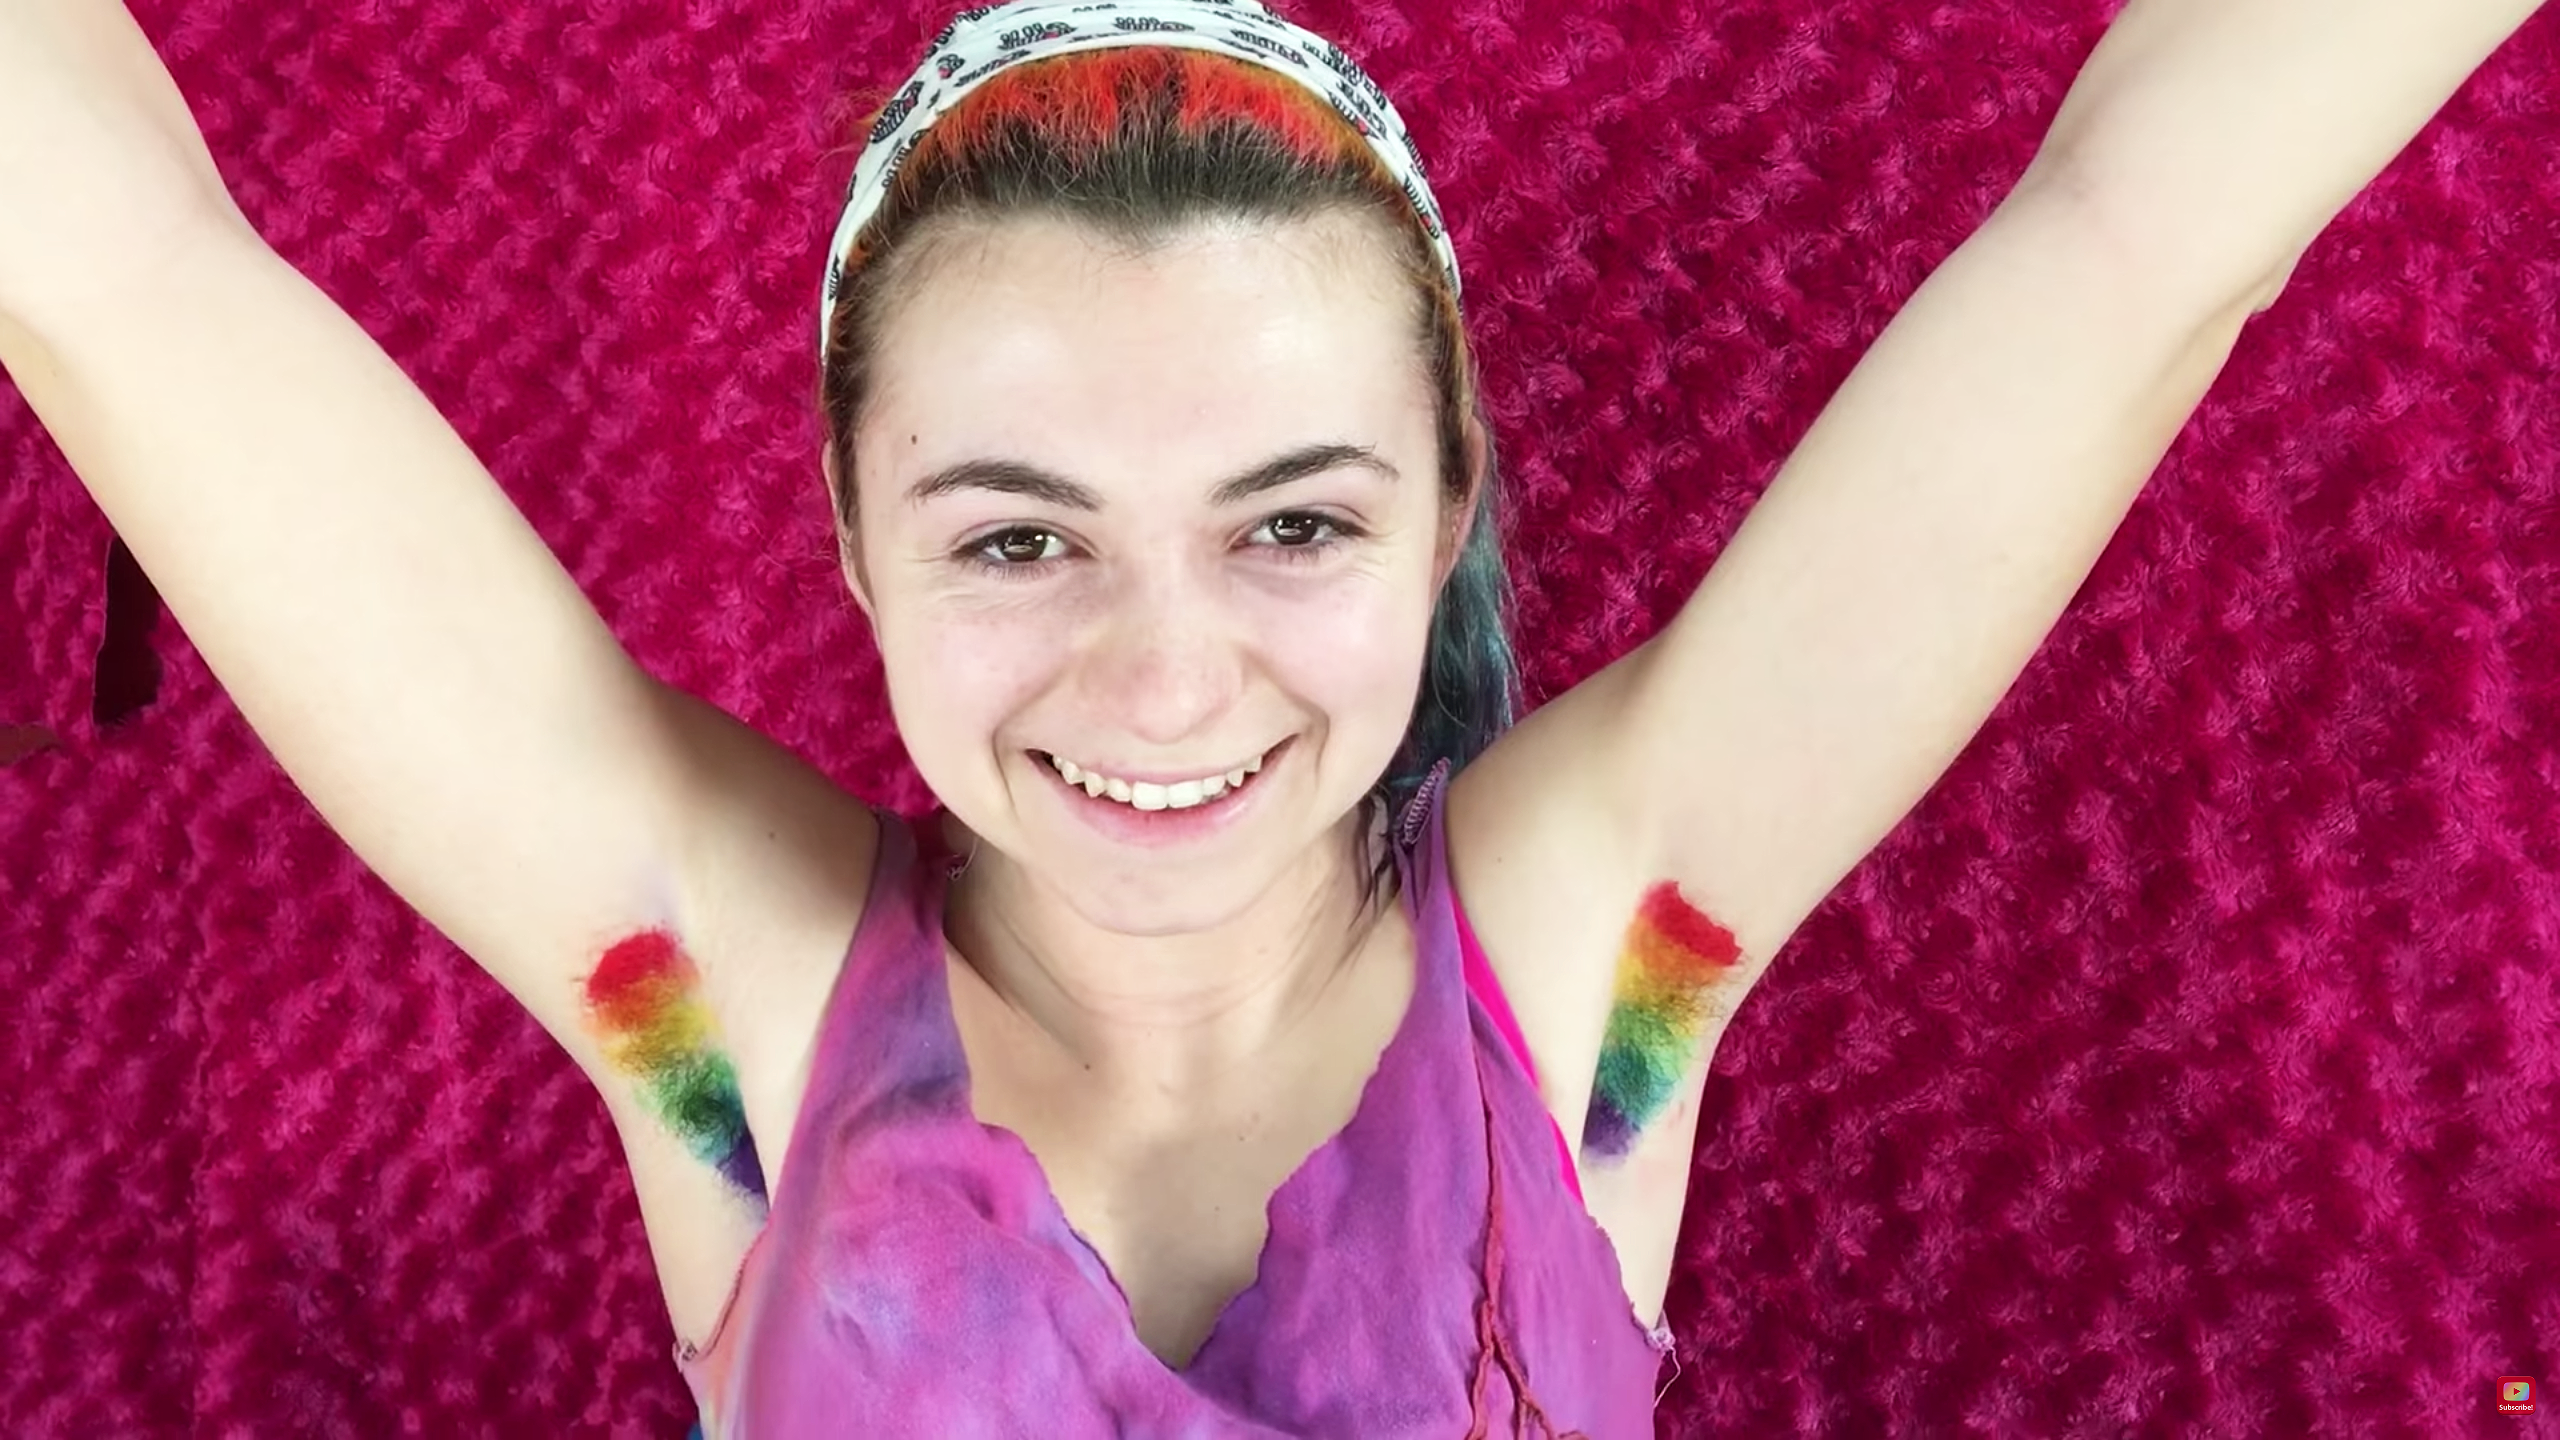 These Unicorn Armpit Hair Photos Prove This Is The Best Beauty